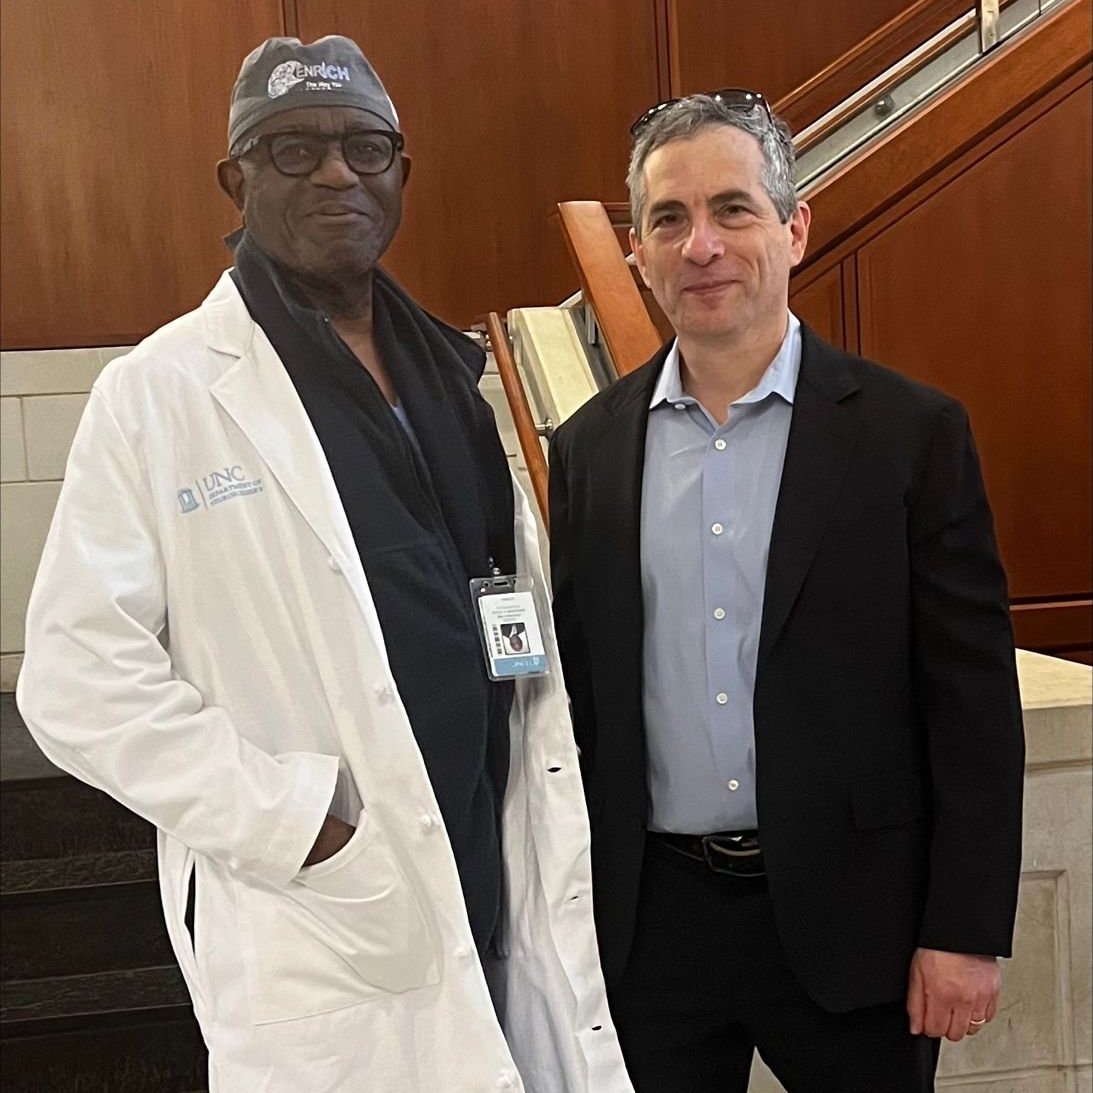 The Weatherspoon's inaugural #BrainTumor mini-symposium was an incredible success featuring keynote speaker Dr. Timothy Gershon from @EmoryUniversity as our keynote speaker. The symposium featured talks from rising stars in the field of pediatric #BrainCancer